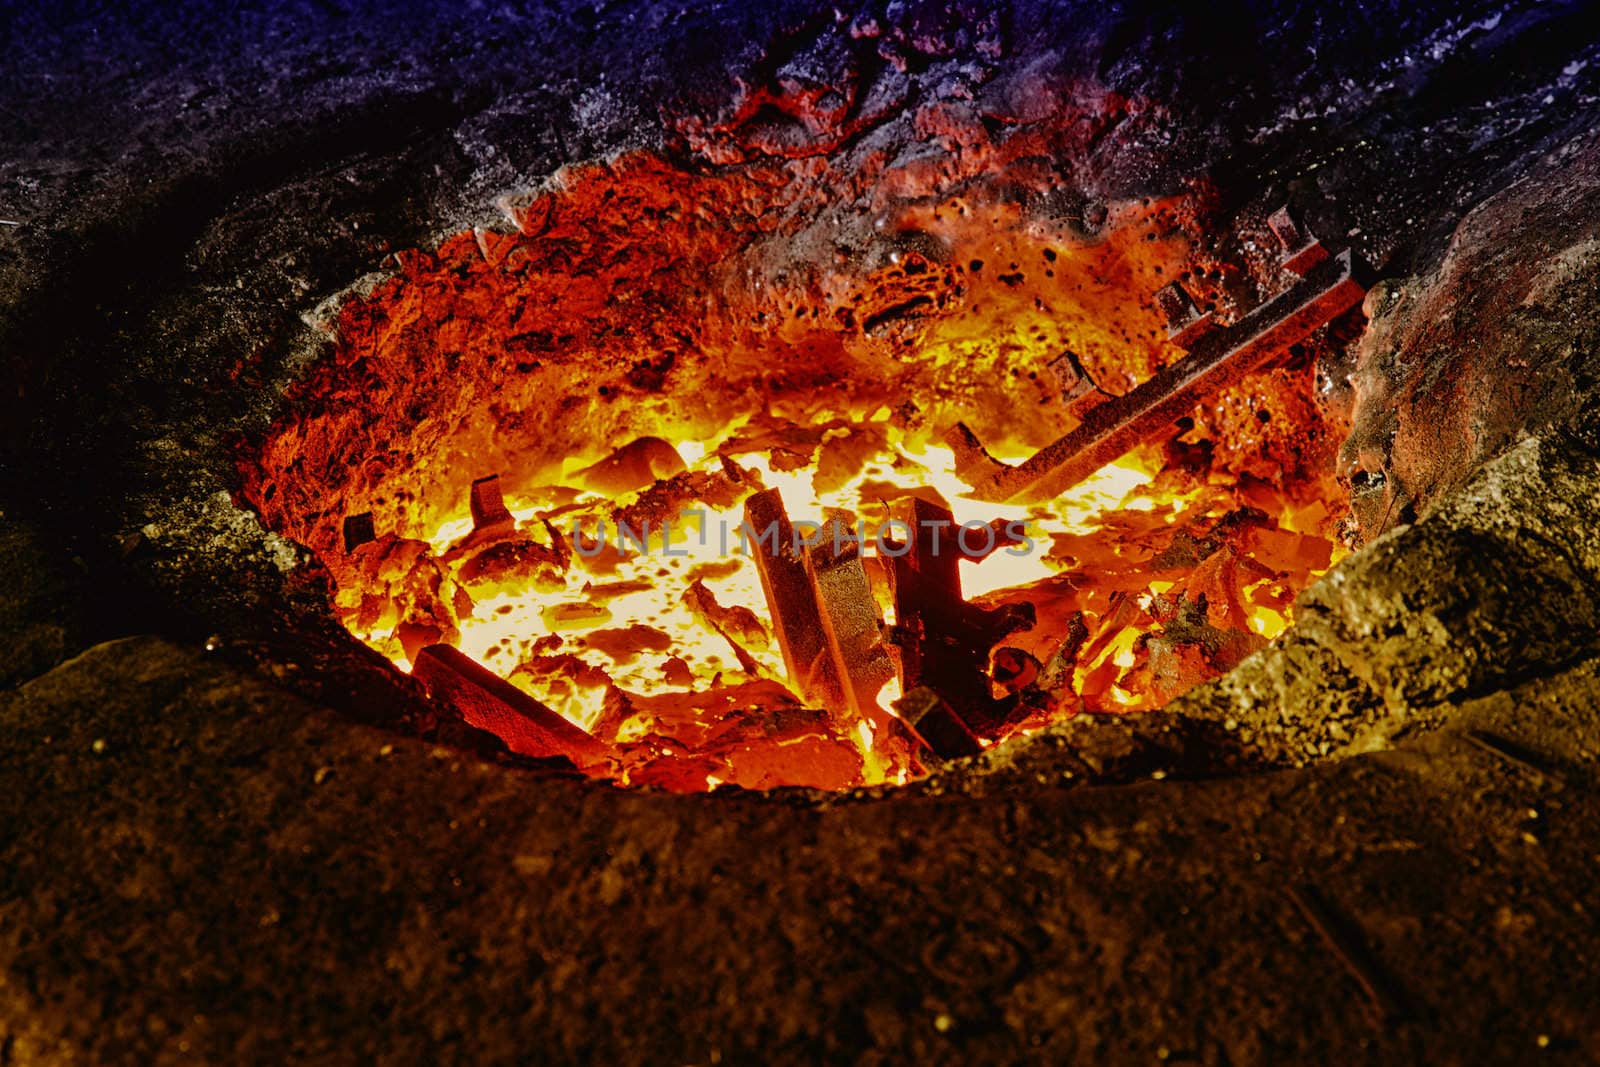 Melting iron in a furnace by shamtor